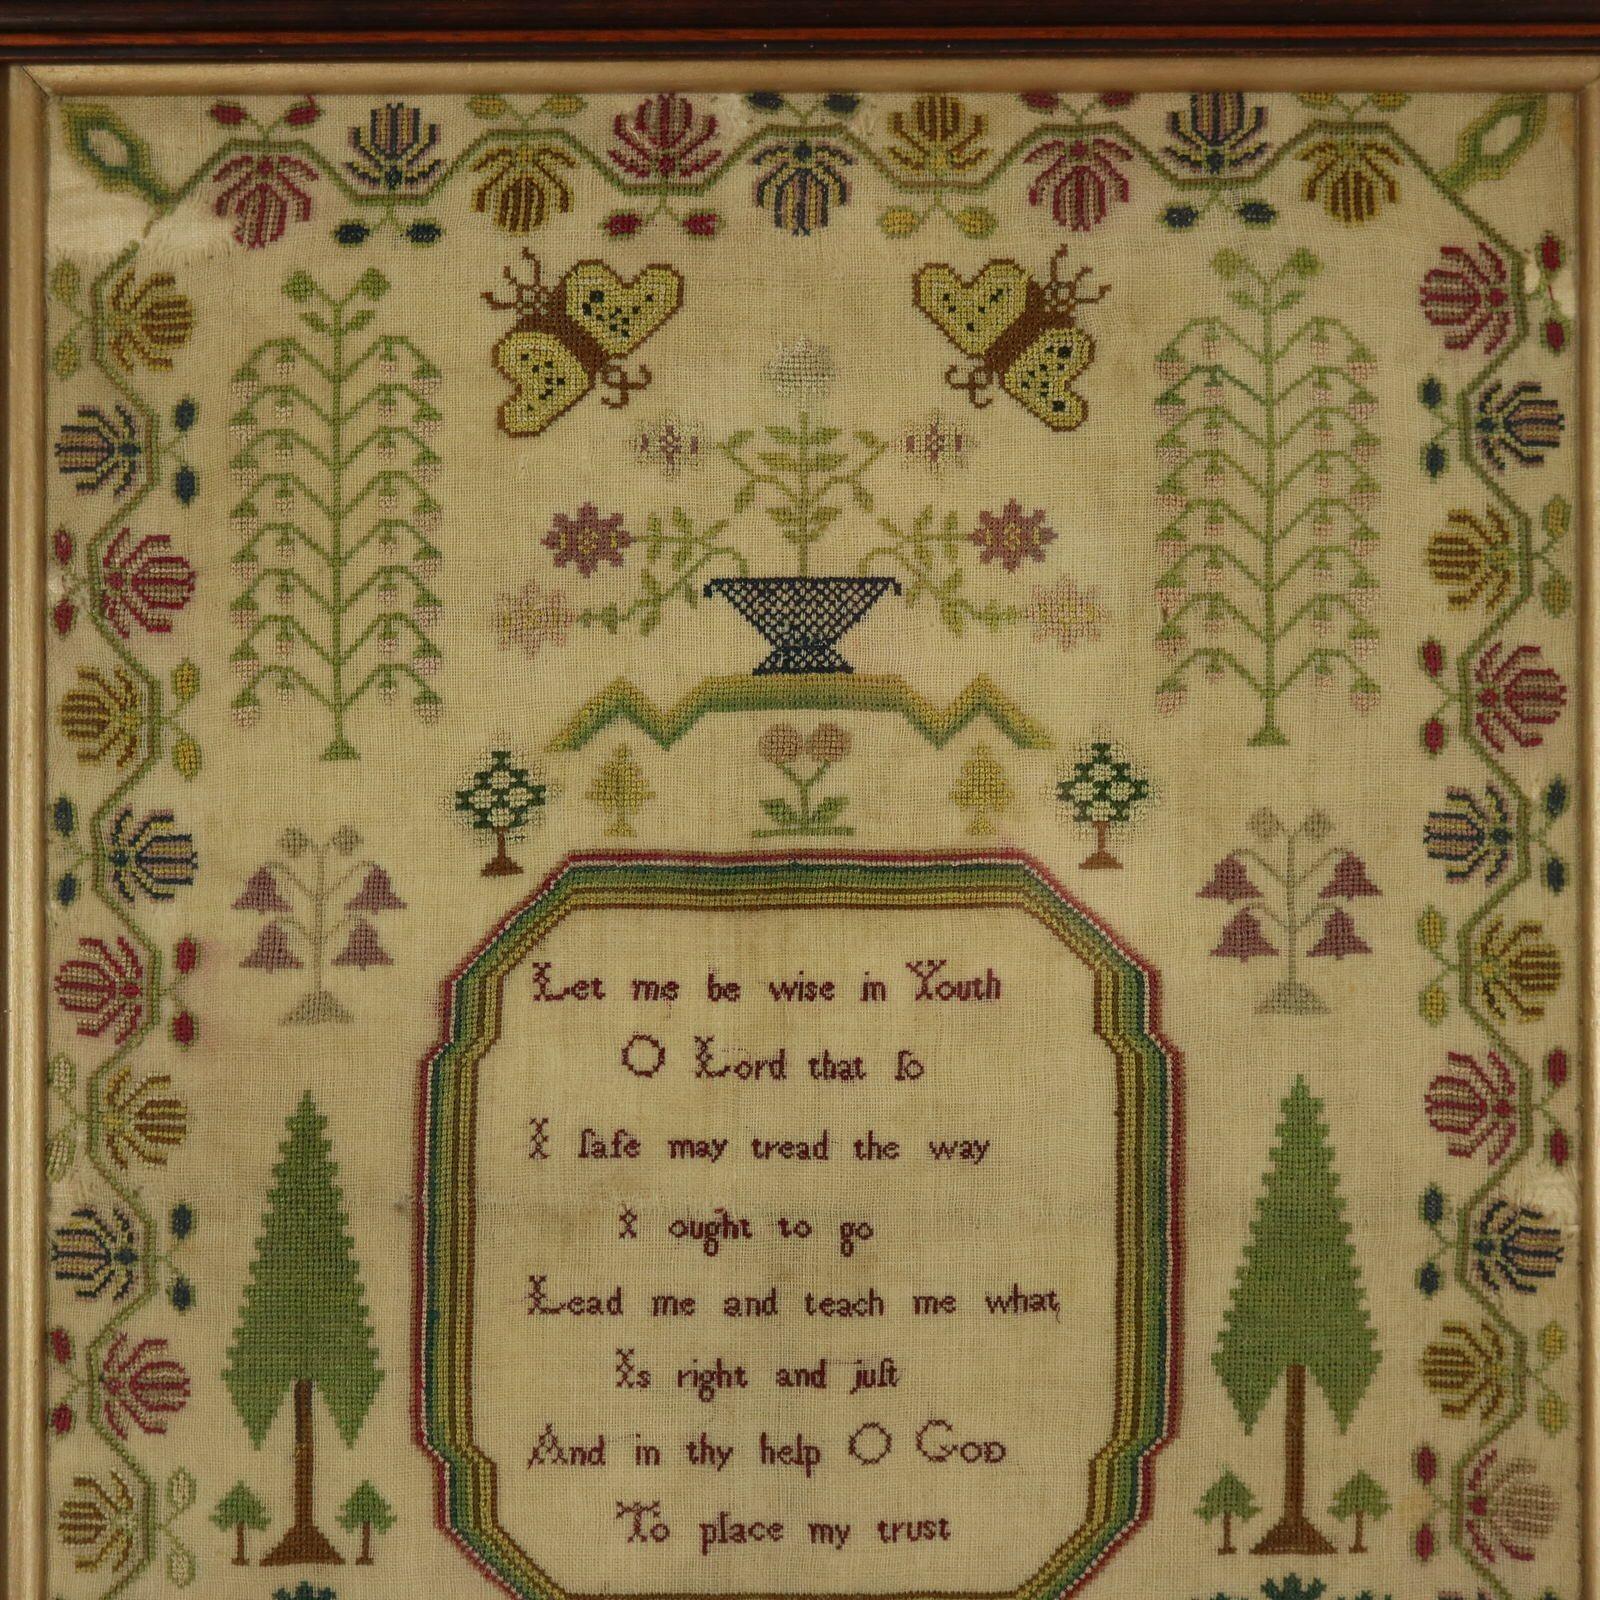 Regency Sampler, 1824, by Eliza Brewster. The sampler is worked in silk on a linen ground, mainly in cross stitch. Meandering floral border. Colours green, red, brown, gold, silver, blue and pink. Verse reads, 'Let me be wise in Youth, O Lord that